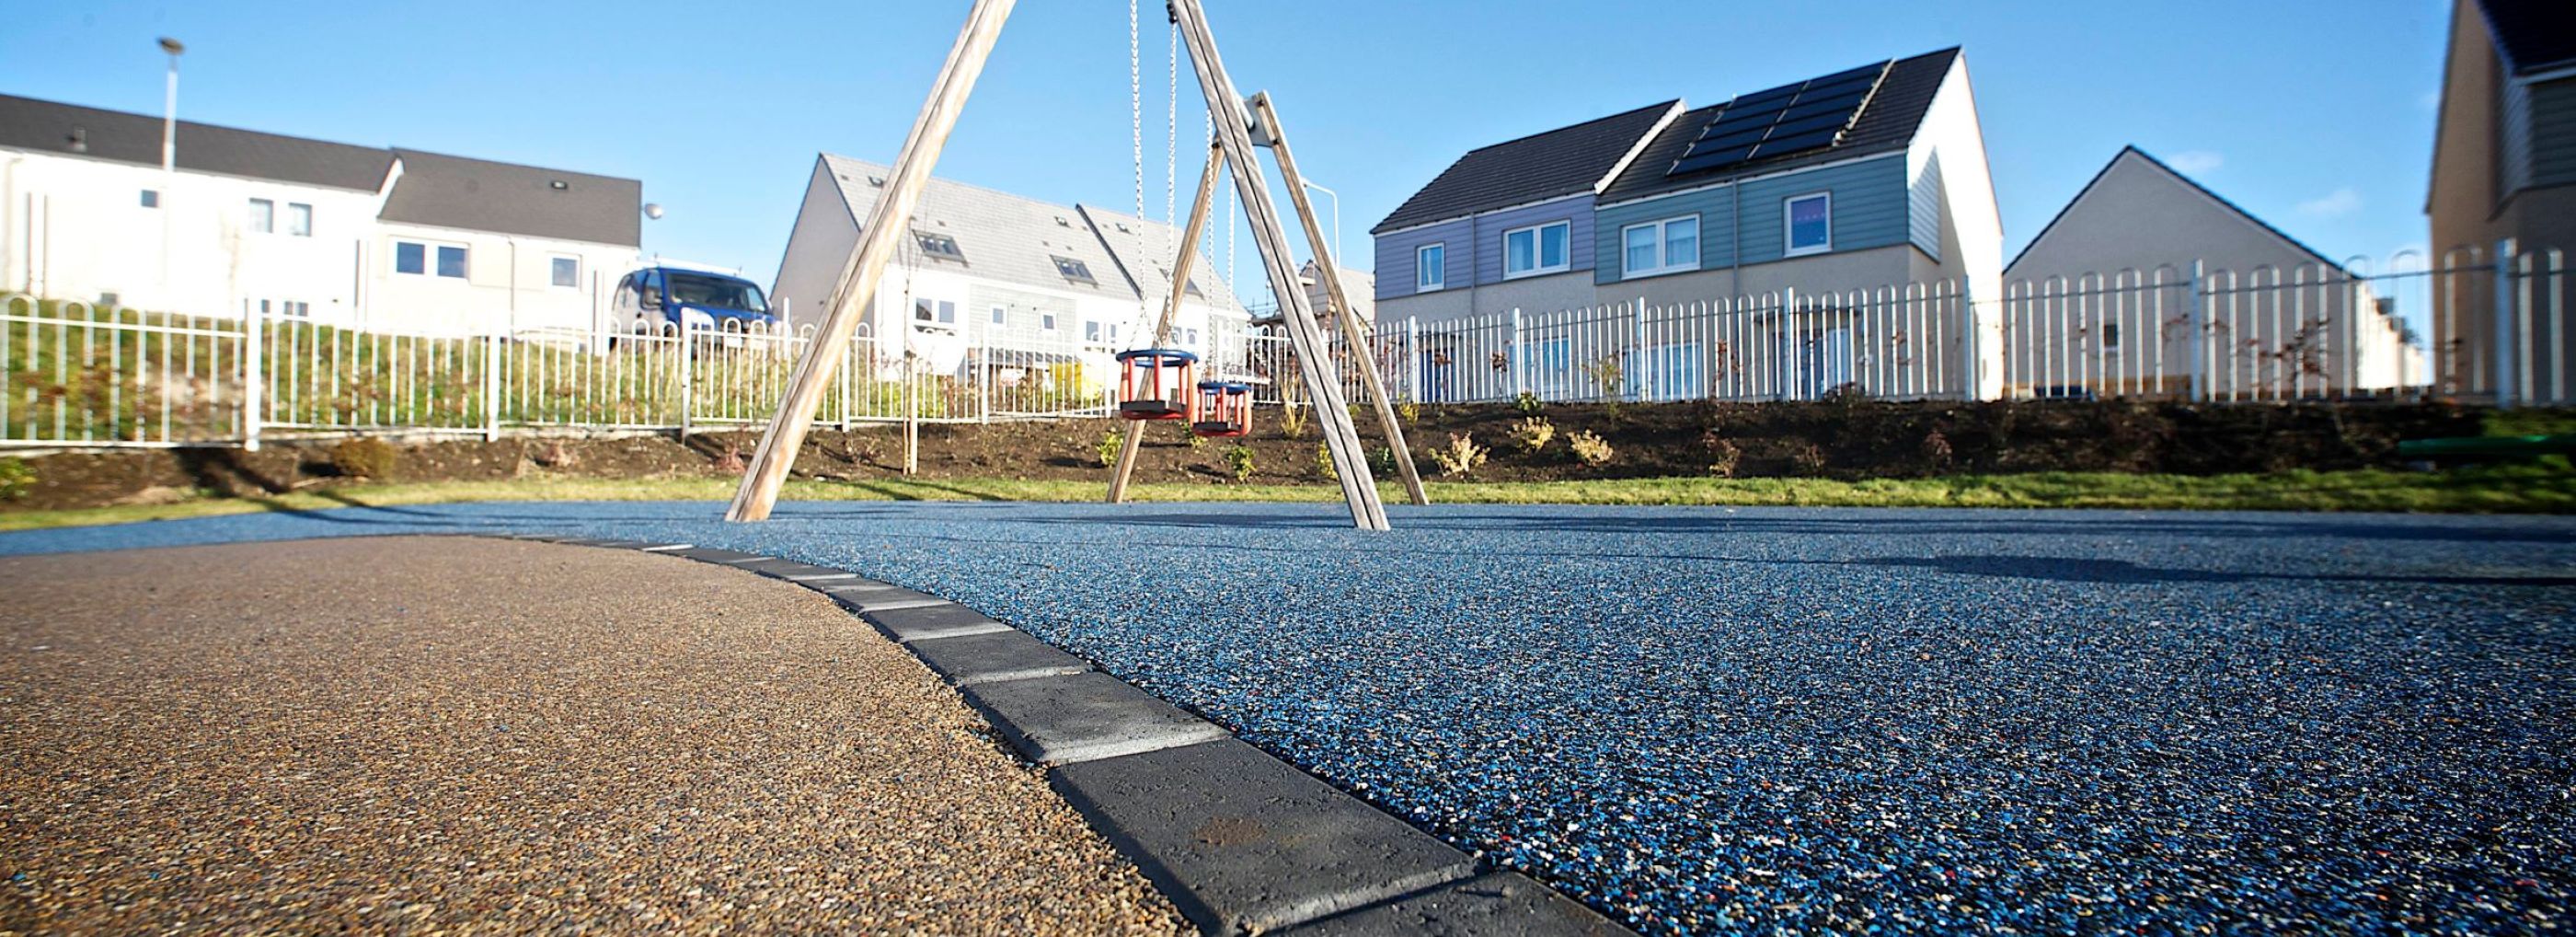 Rubber playground flooring in a house estate.